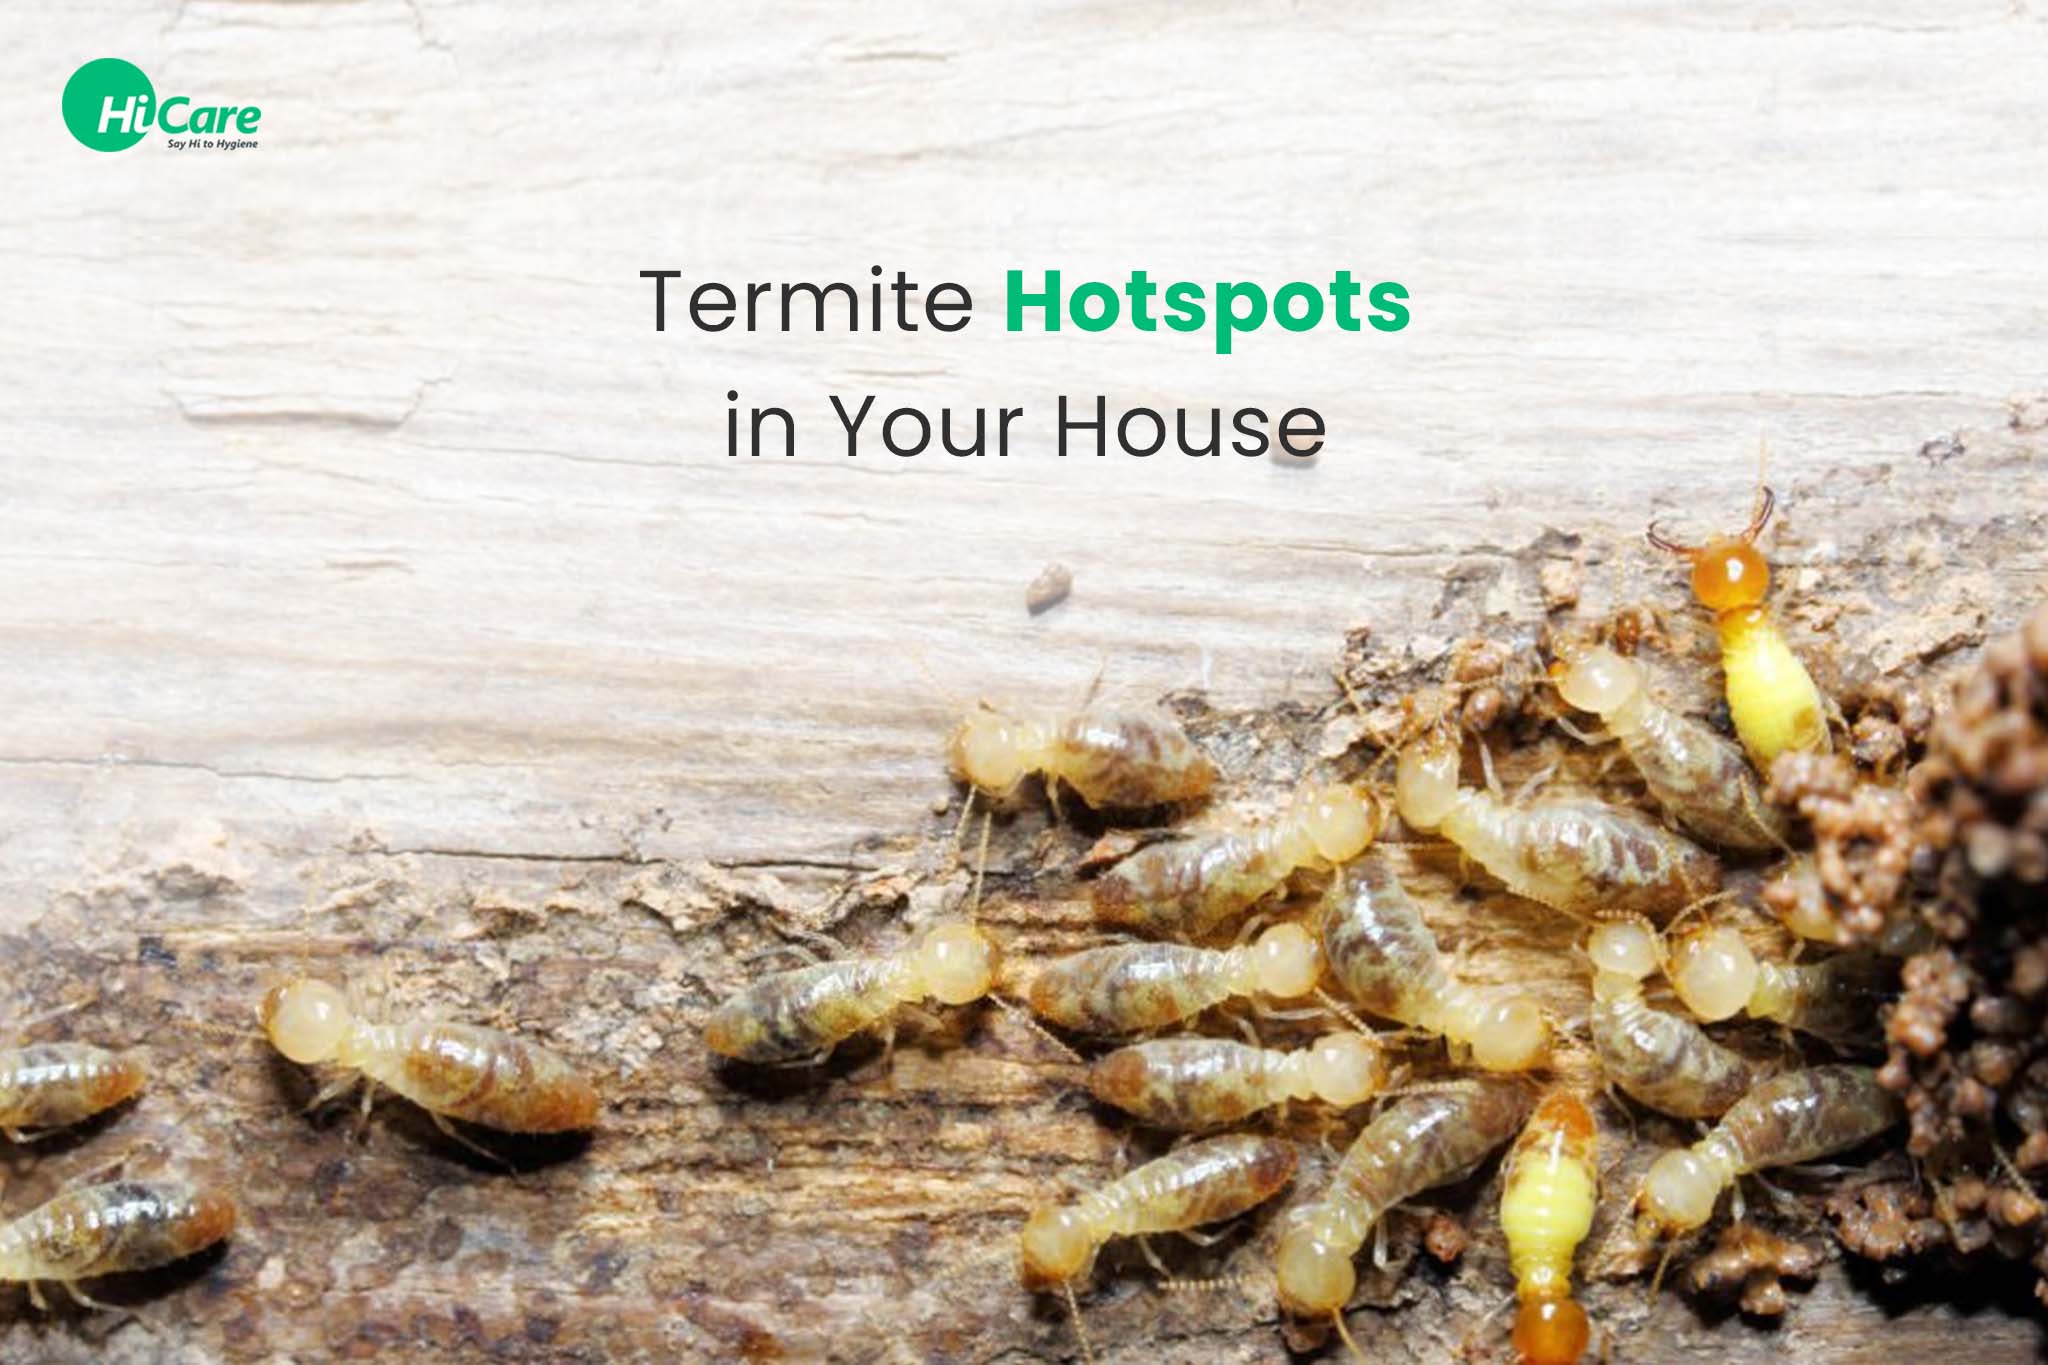 Learn about top 10 termite infestation hotspots where you can find termites in the house. It is critical in the proper elimination of termites from your home based on thorough termite detection.